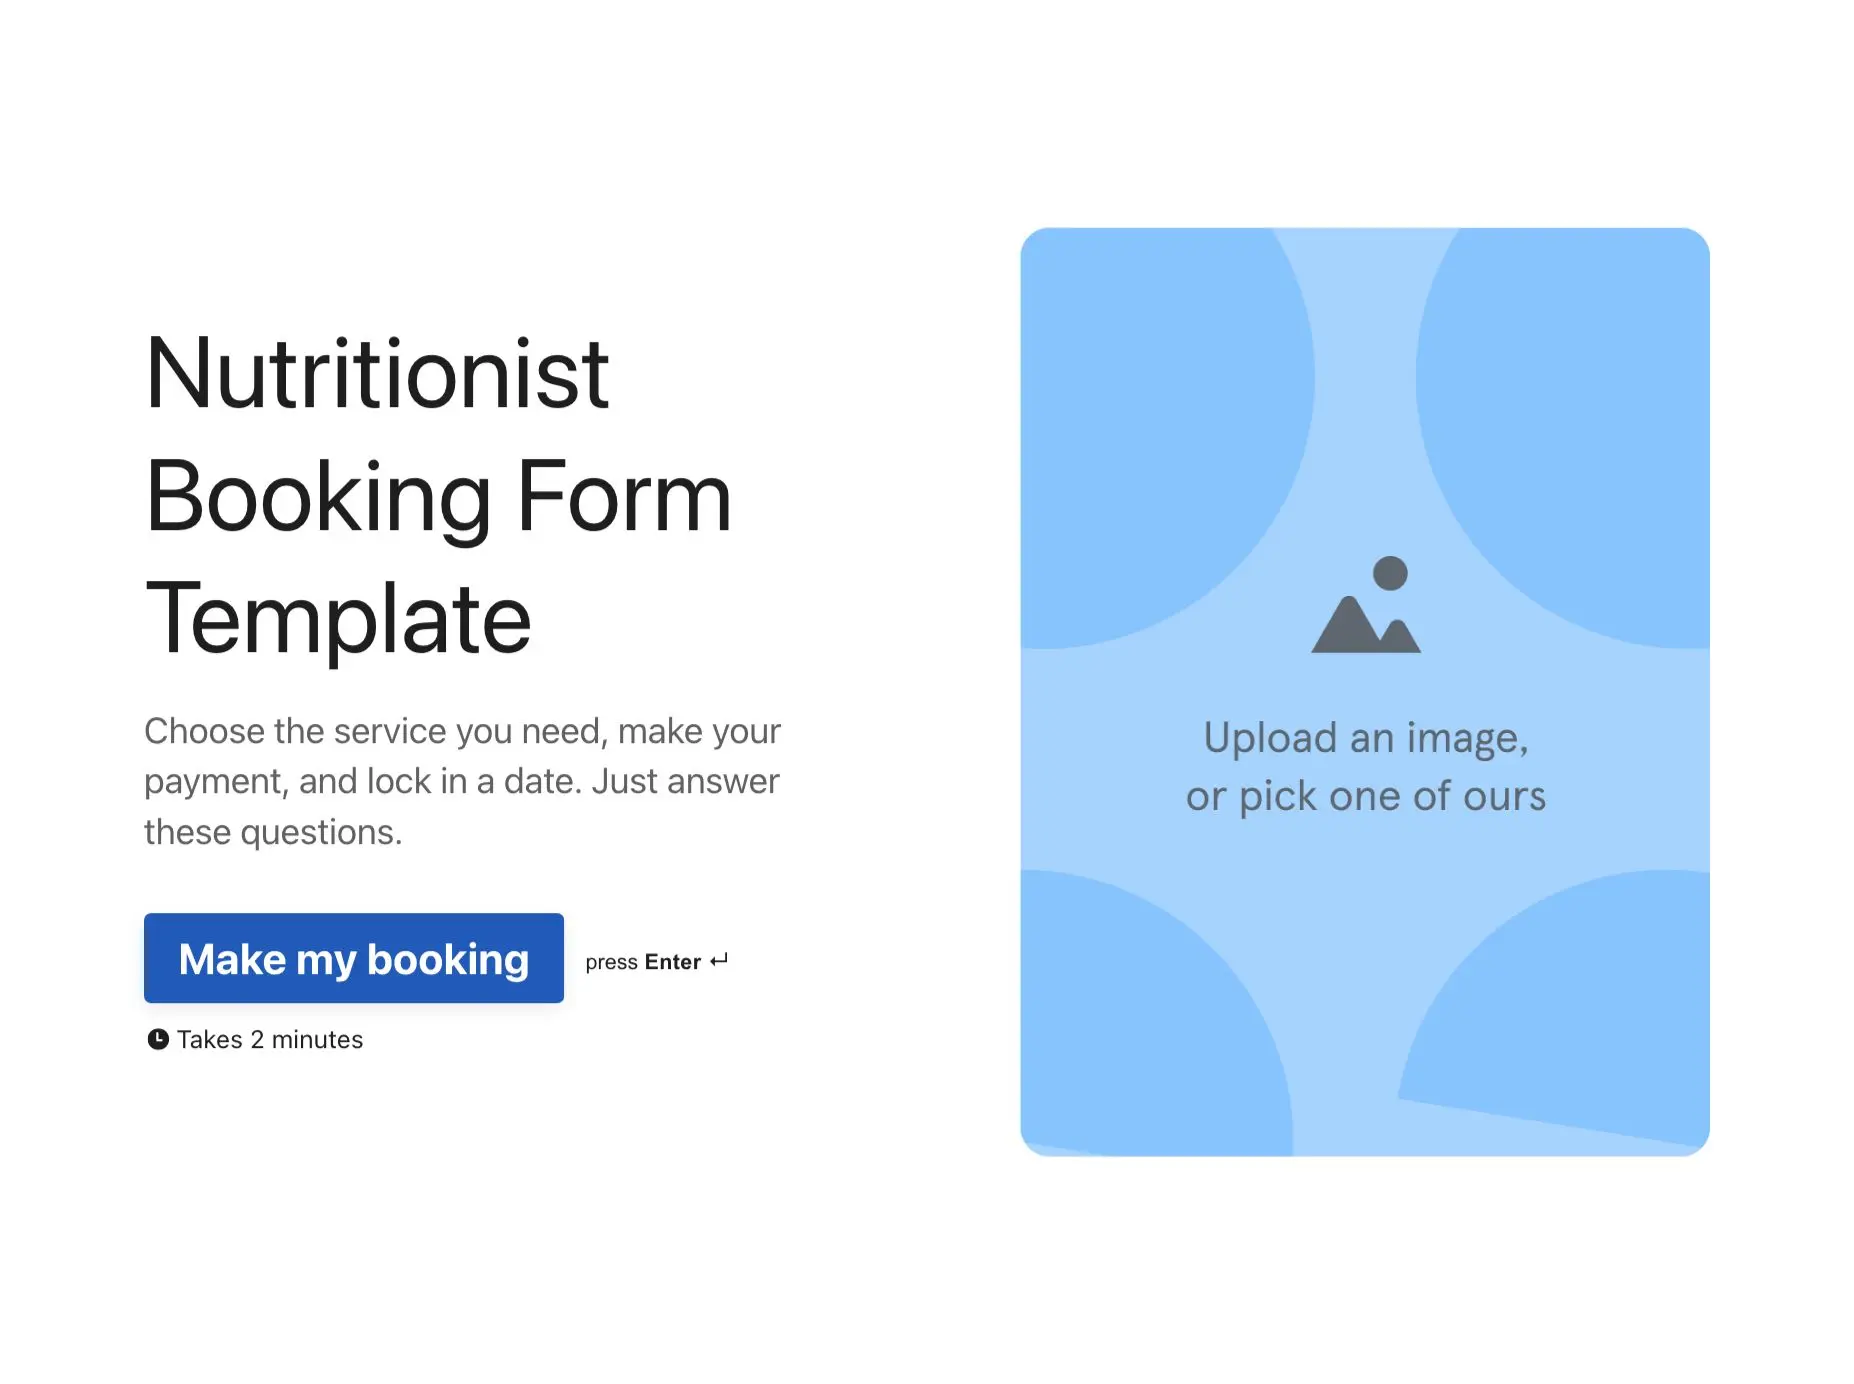 Nutritionist Booking Form Template Hero